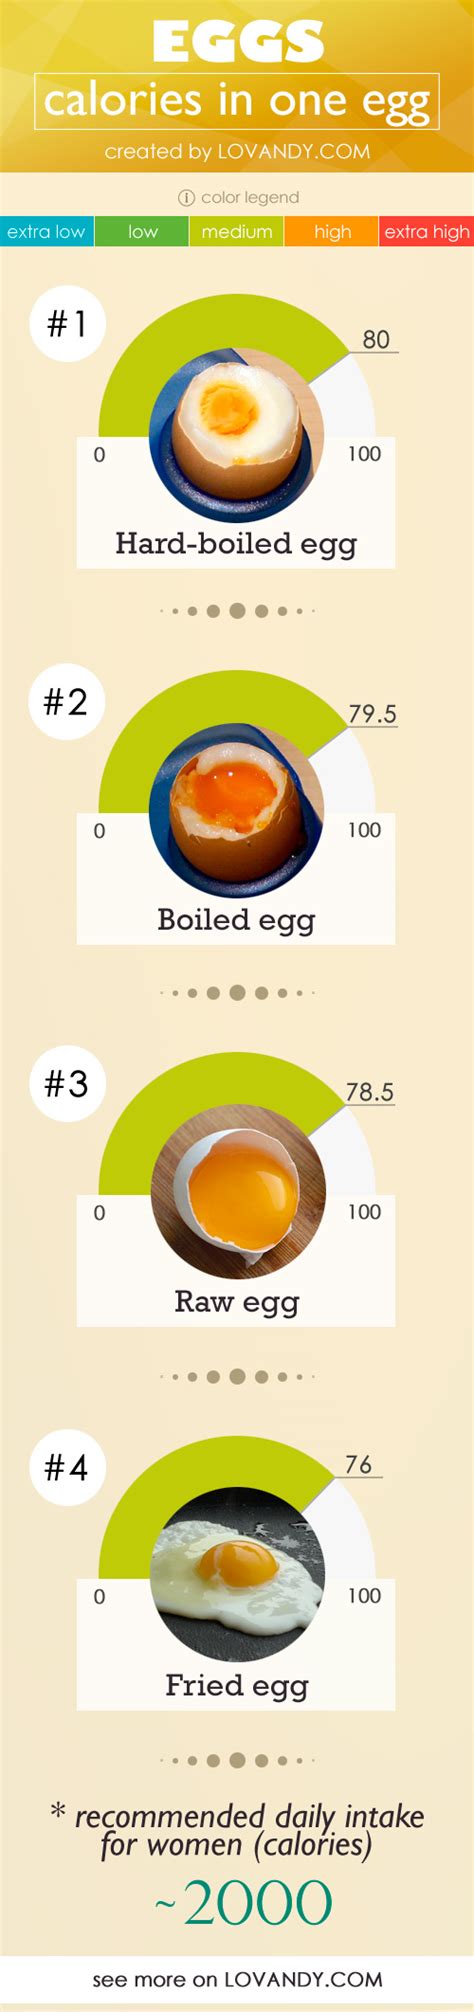 Now that you know what a basic raw egg contains, here's the catch. Сalories in an Egg (Boiled, Hard-Boiled, Fried, Raw)